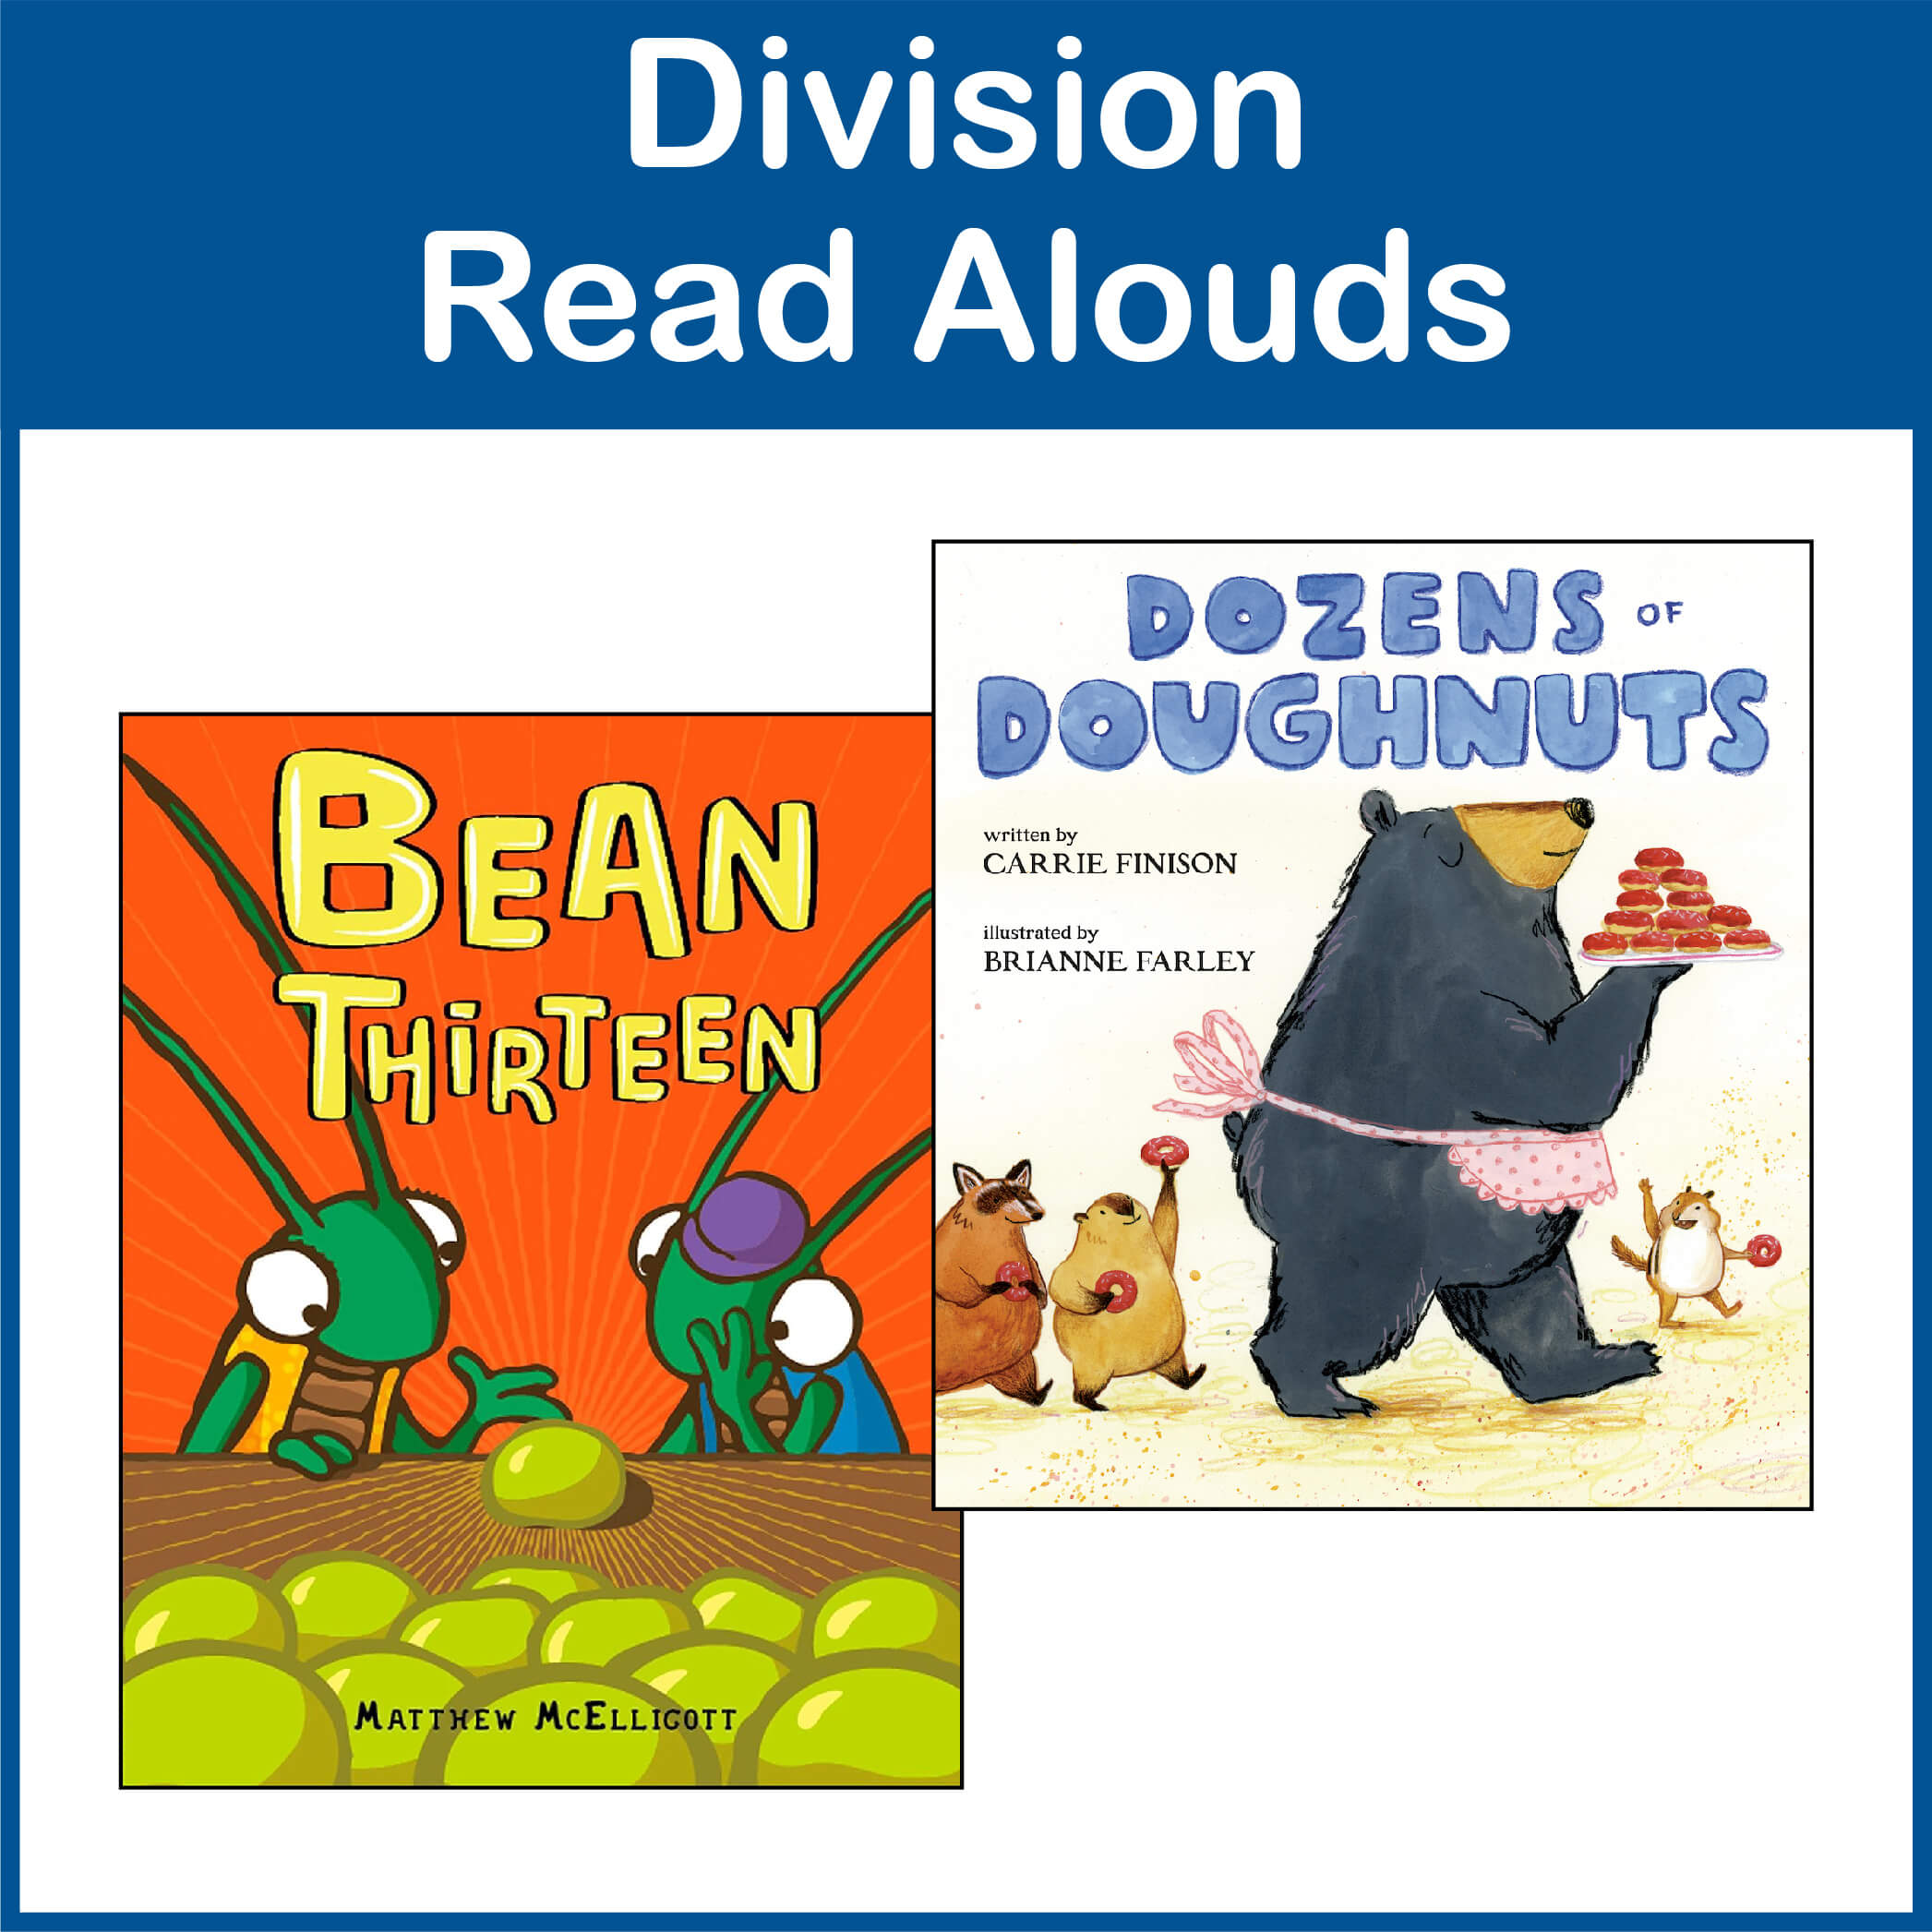 Division Read Alouds